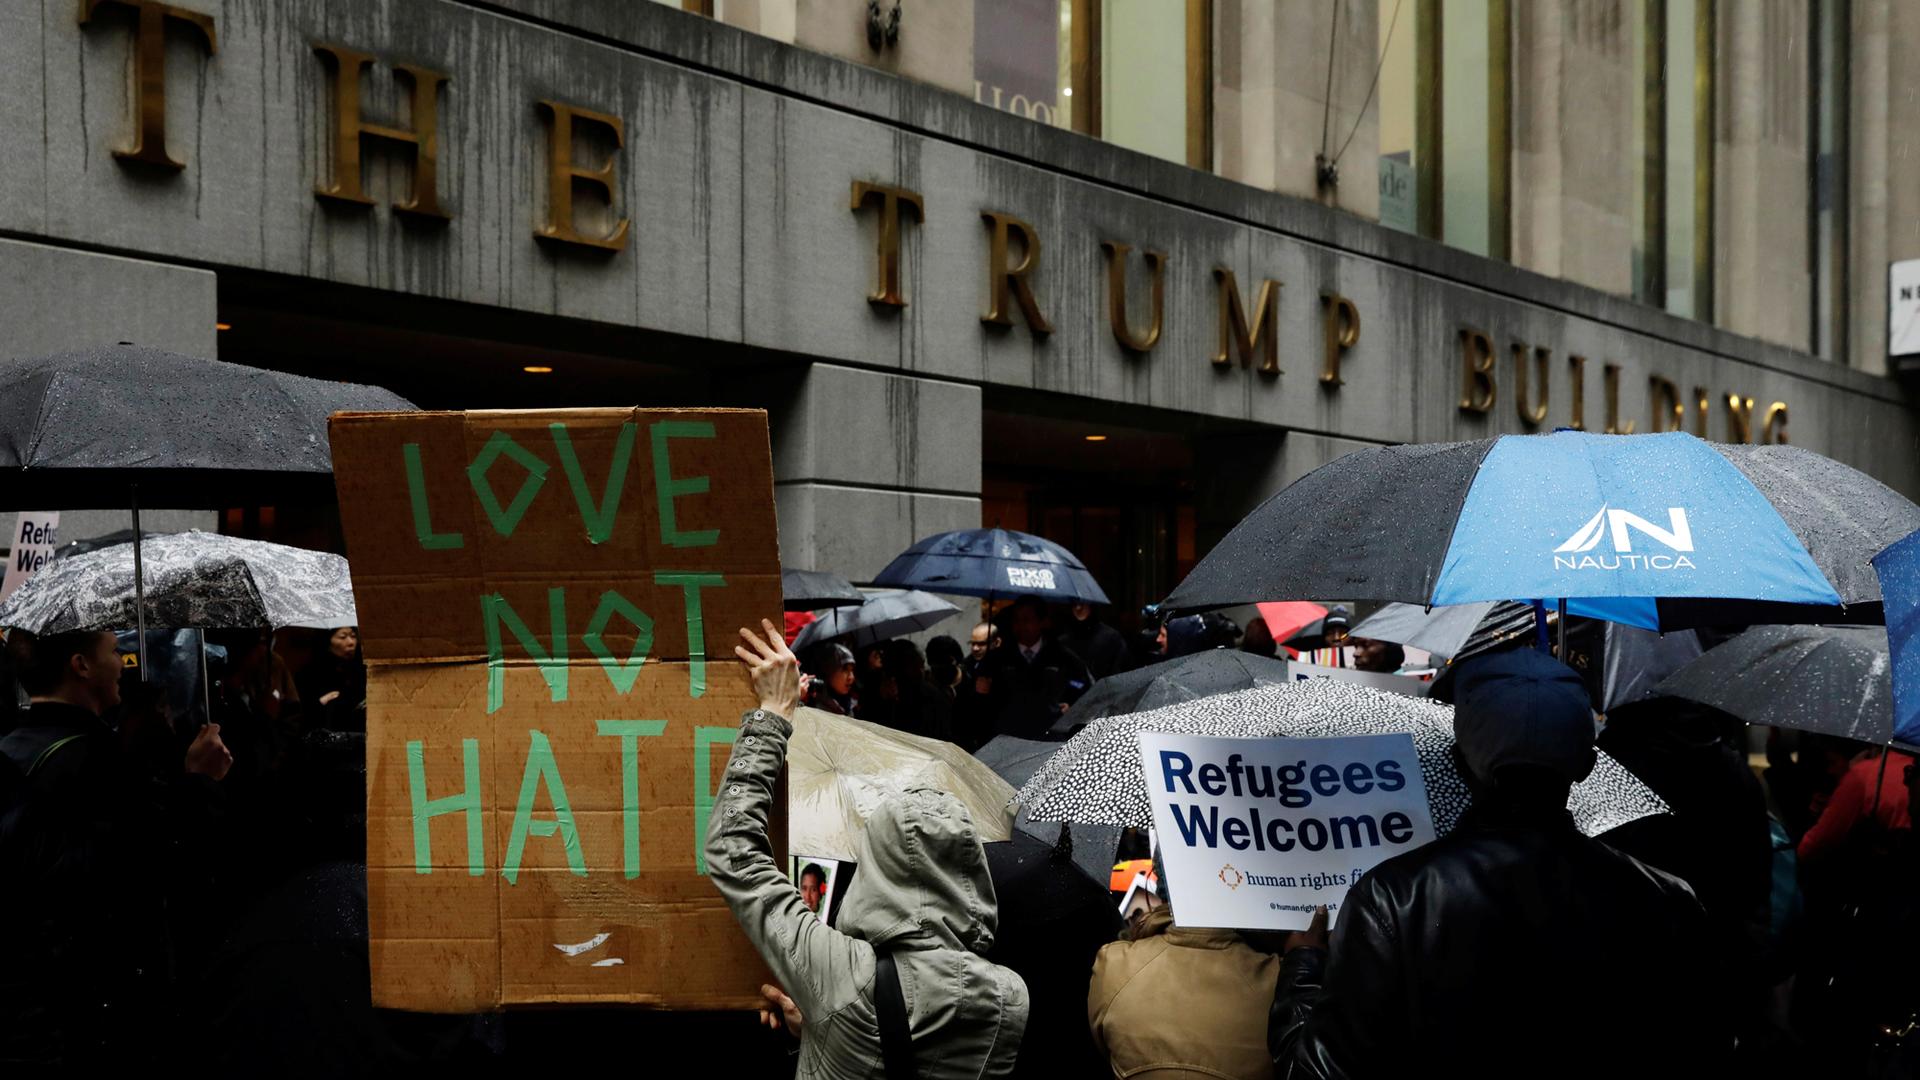 Demonstrators march outside the Trump Building in New York, March 28, 2017.